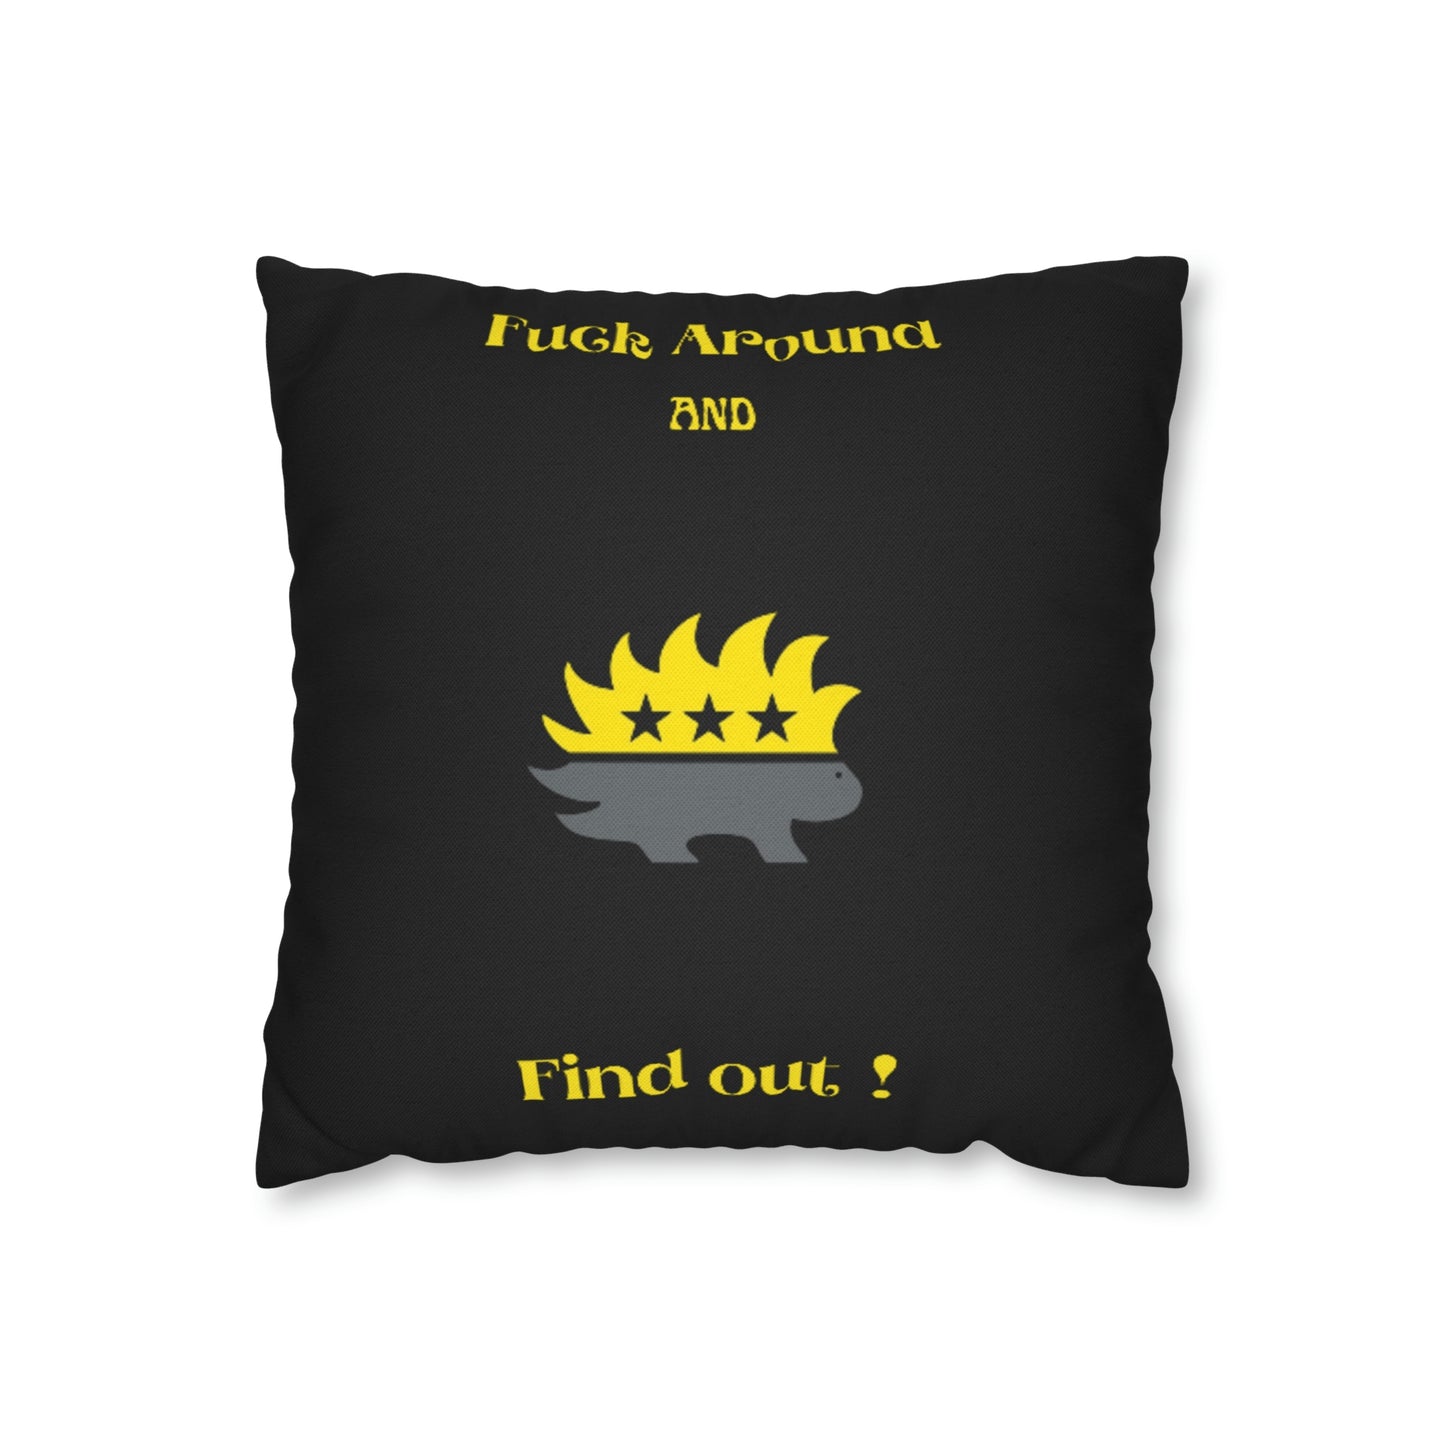 Fuck Around And Find Out Polyester Square Pillow Case 14 x 14